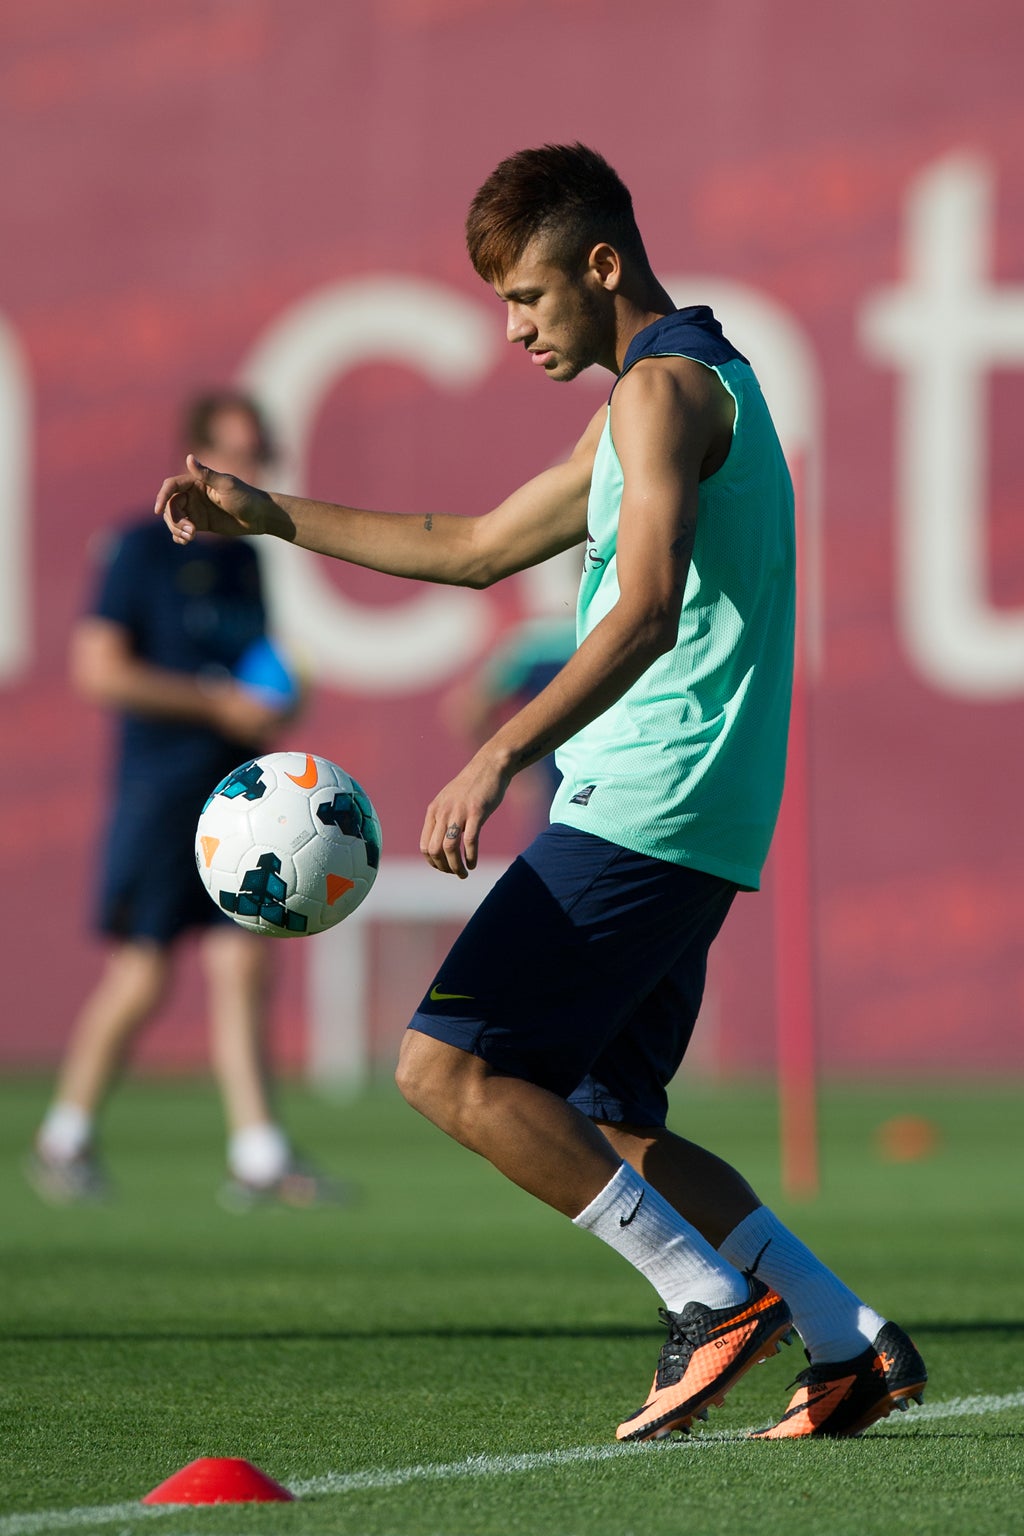 Neymar shows off his juggling skills during training for his new Barcelona